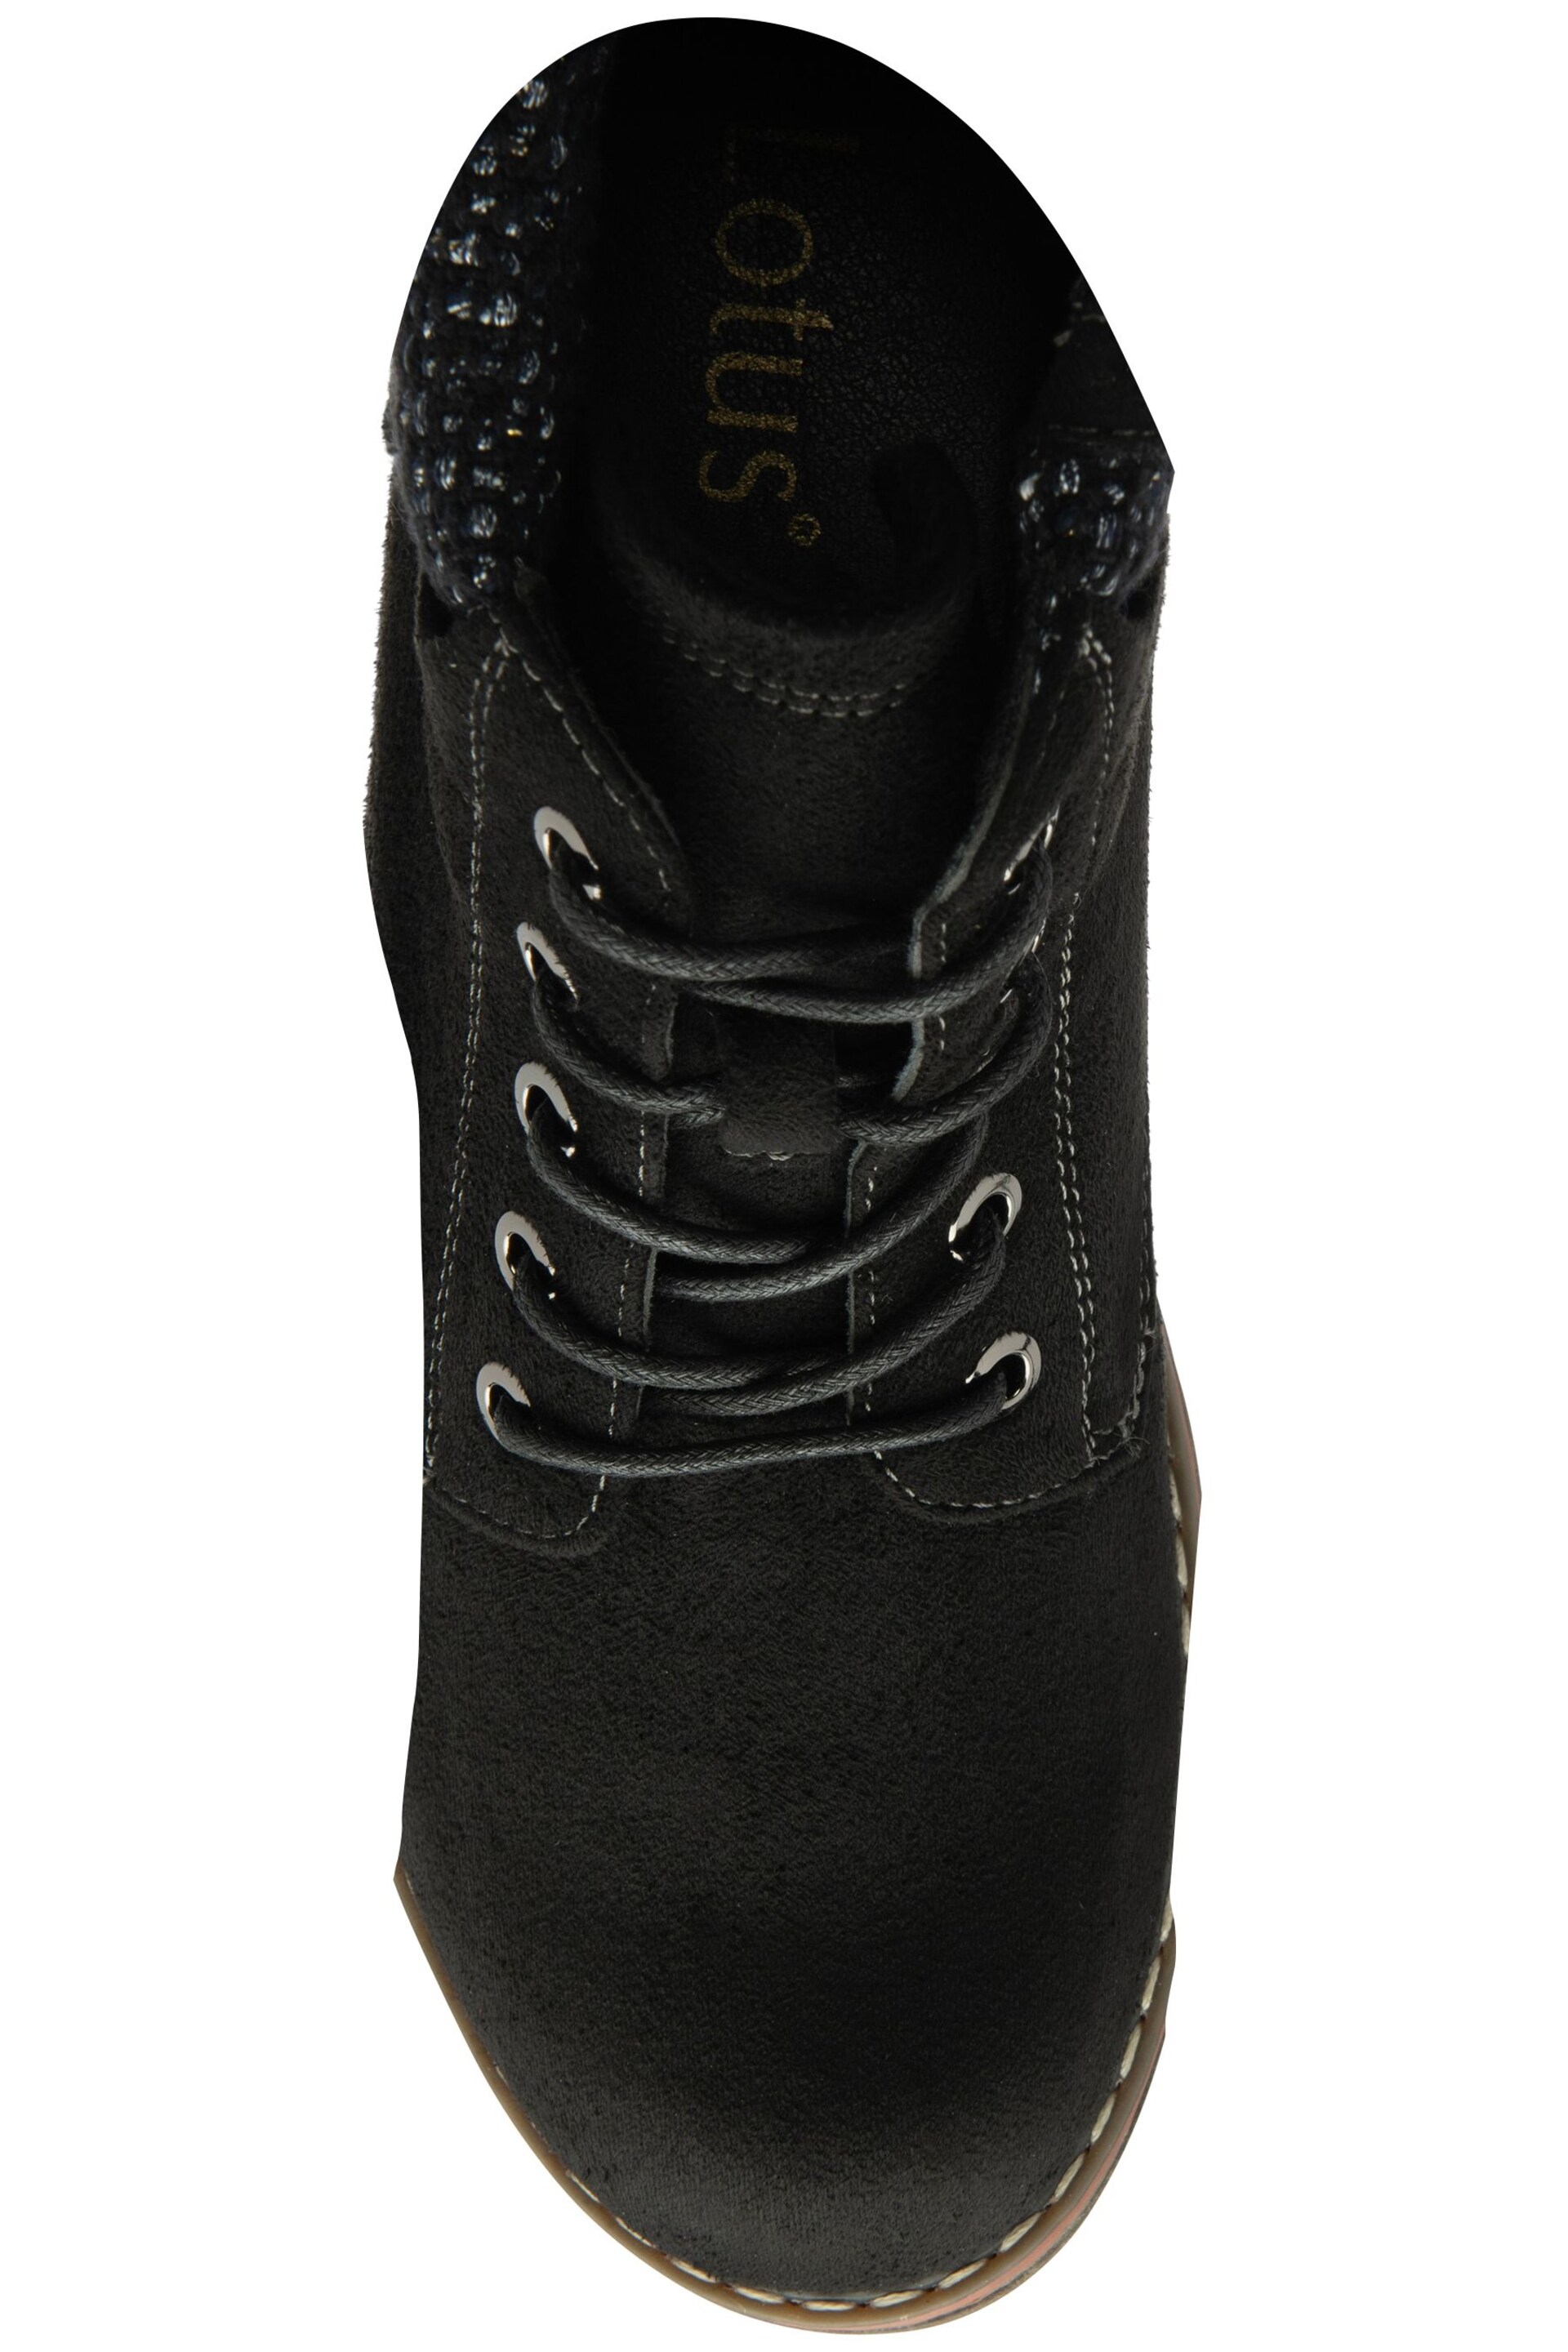 Lotus Black Lace-Up Ankle Boots - Image 4 of 4